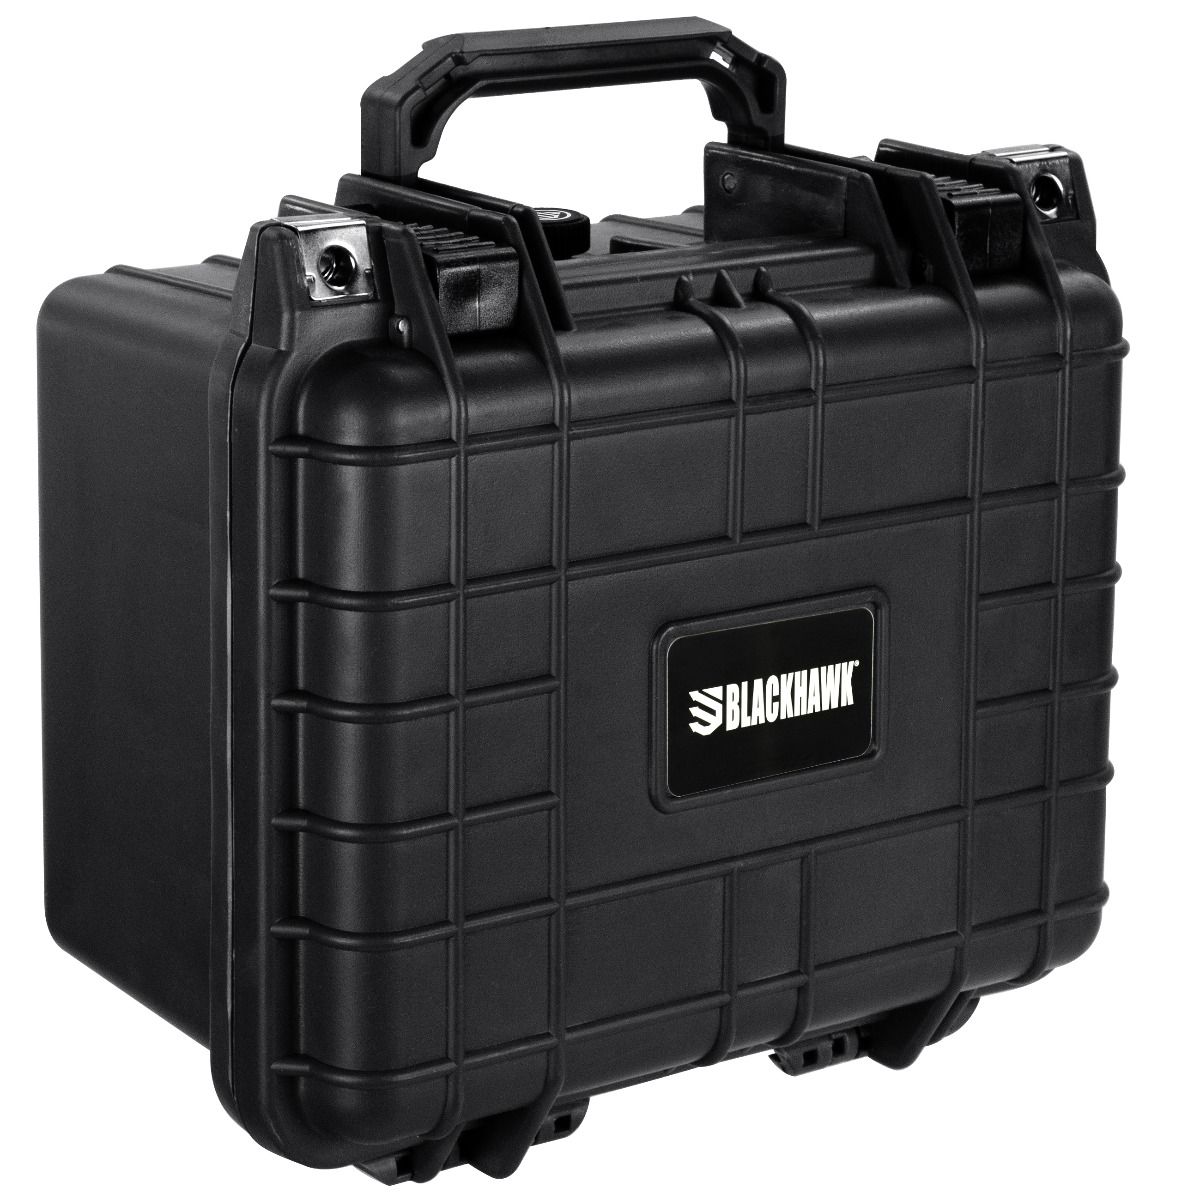 Case sizing options range from a large 53" rifle case to a small 9" compact equipment case.